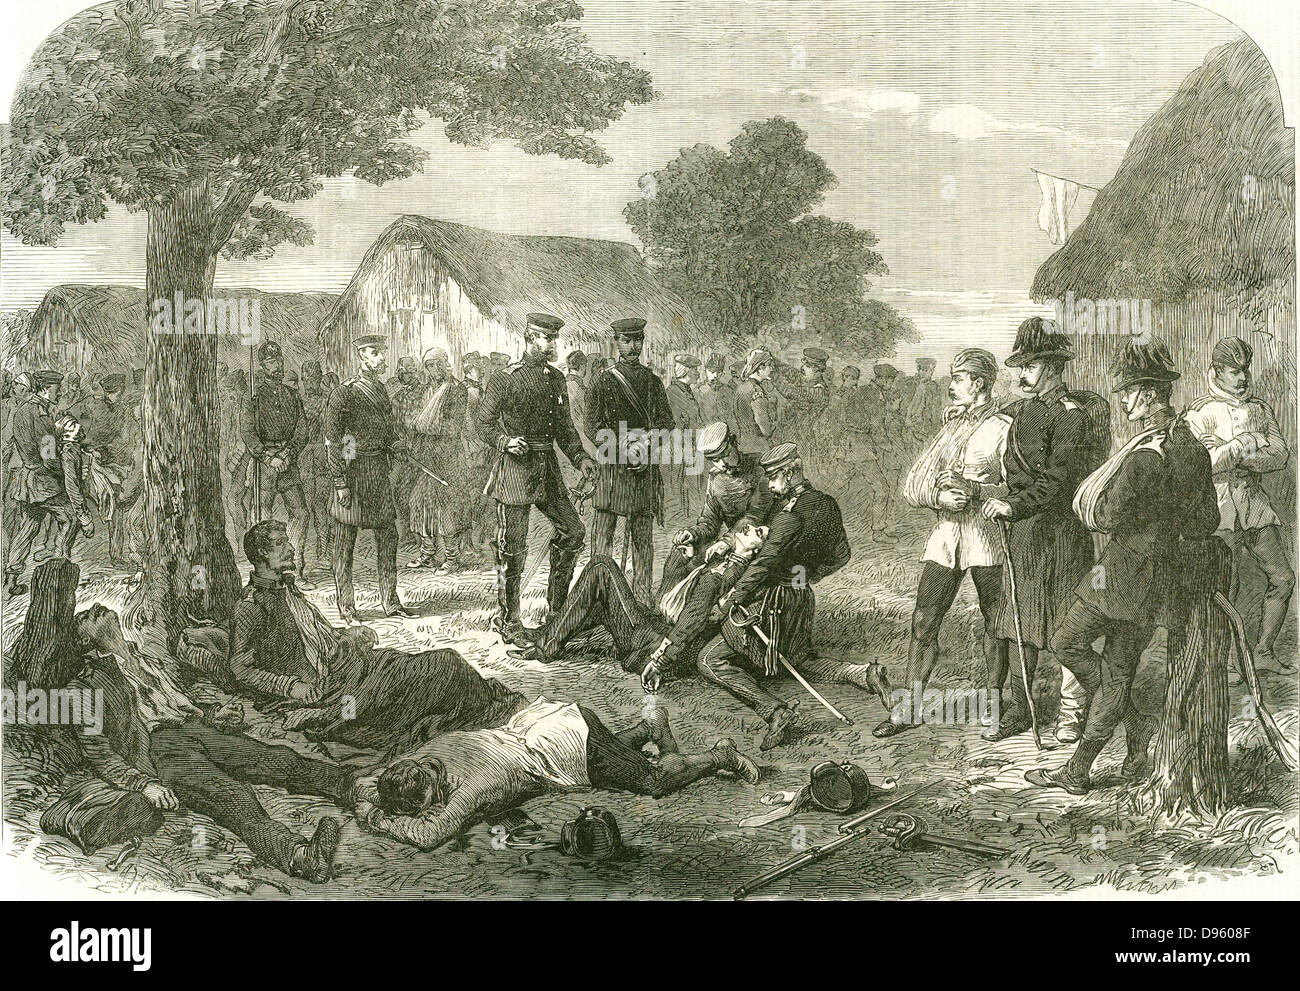 Battle of Sadowa (Sadova, Koniggratz), Bohemia, 3 July 1866, the decisive battle in the Austro-Prussian War.  Austria defeated by Prussia. Frederick, Crown Prince of Prussia, visiting wounded survivors of the battle.  From 'The Illustrated London News' 1866. Stock Photo